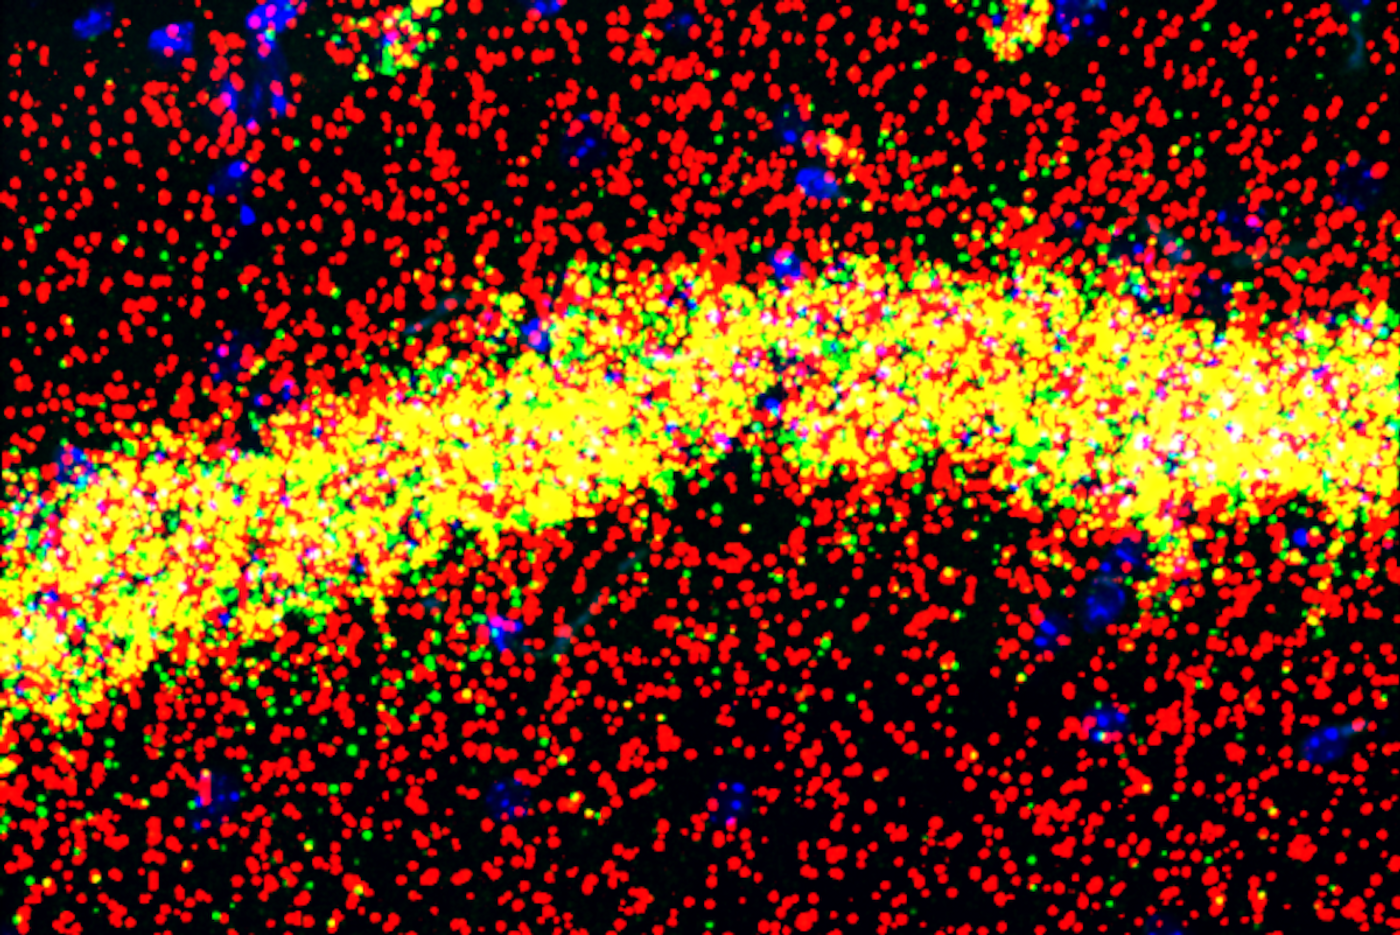 The FMRP protein performs different functions in the cell bodies (yellow) and dendrites (red) of hippocampal memory neurons. / Credit:  Laboratory of Molecular Neuro-oncology at The Rockefeller University